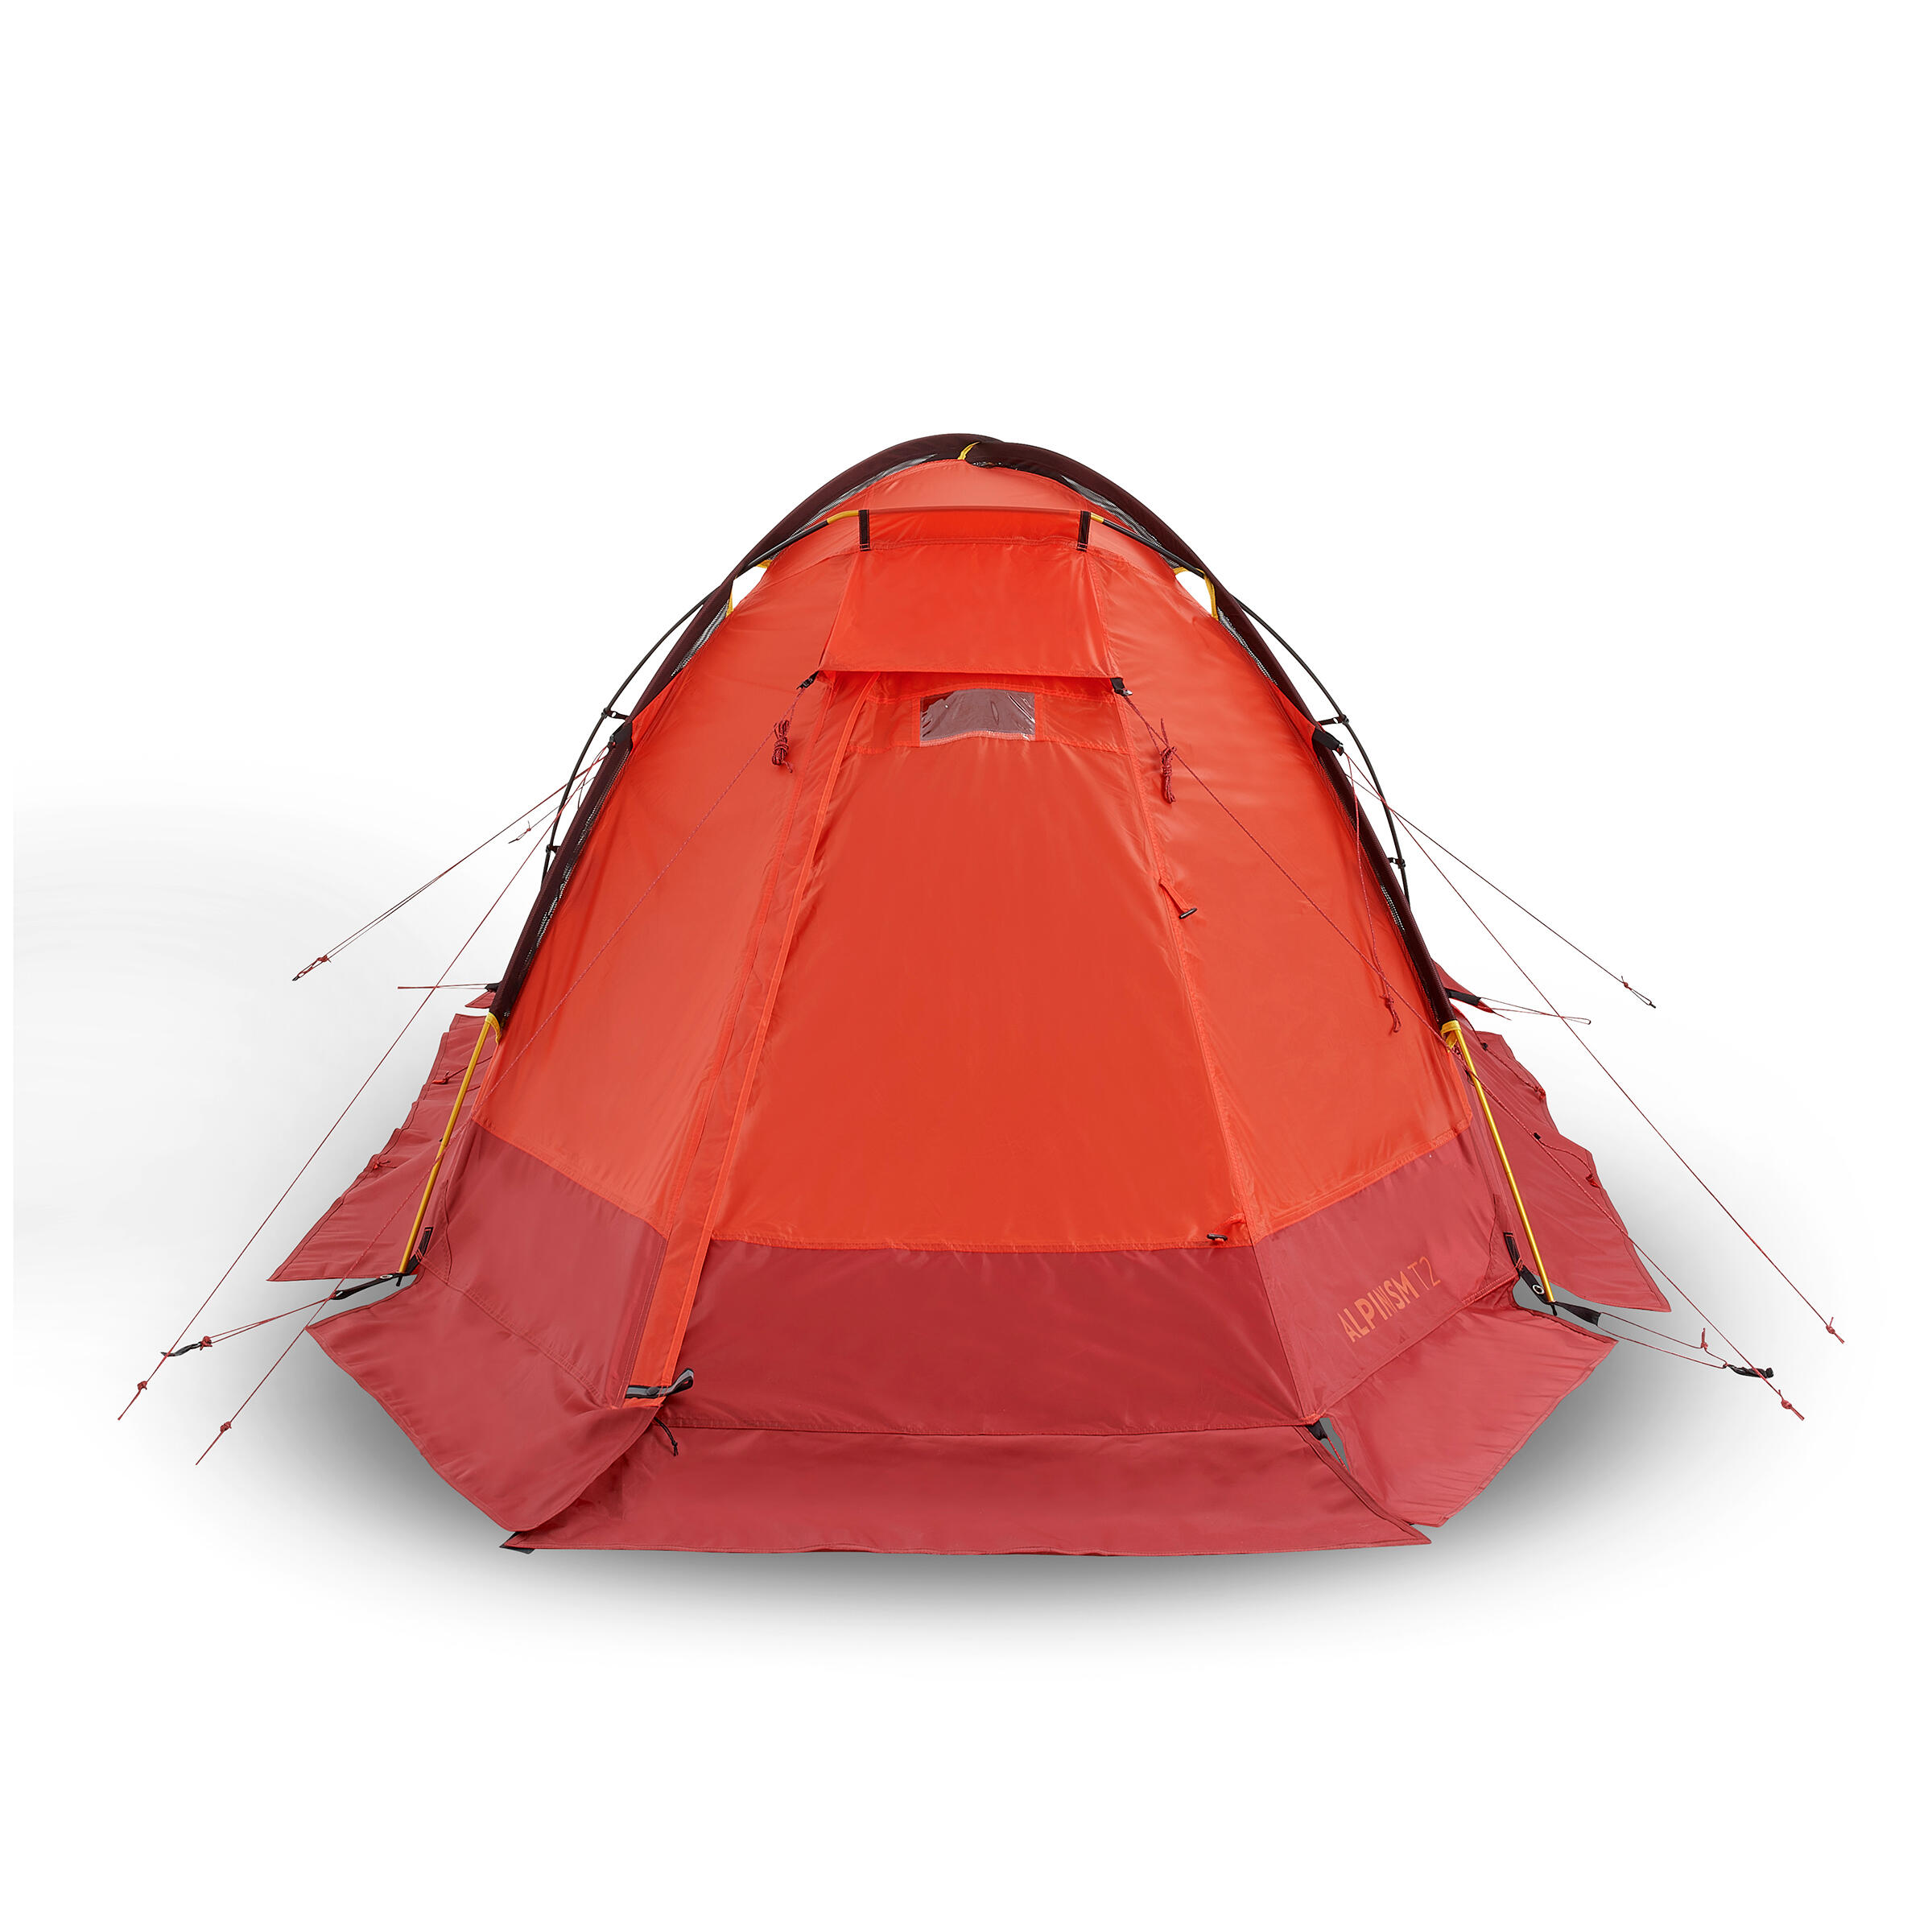 2-person mountaineering tent - Makalu T2 4/14